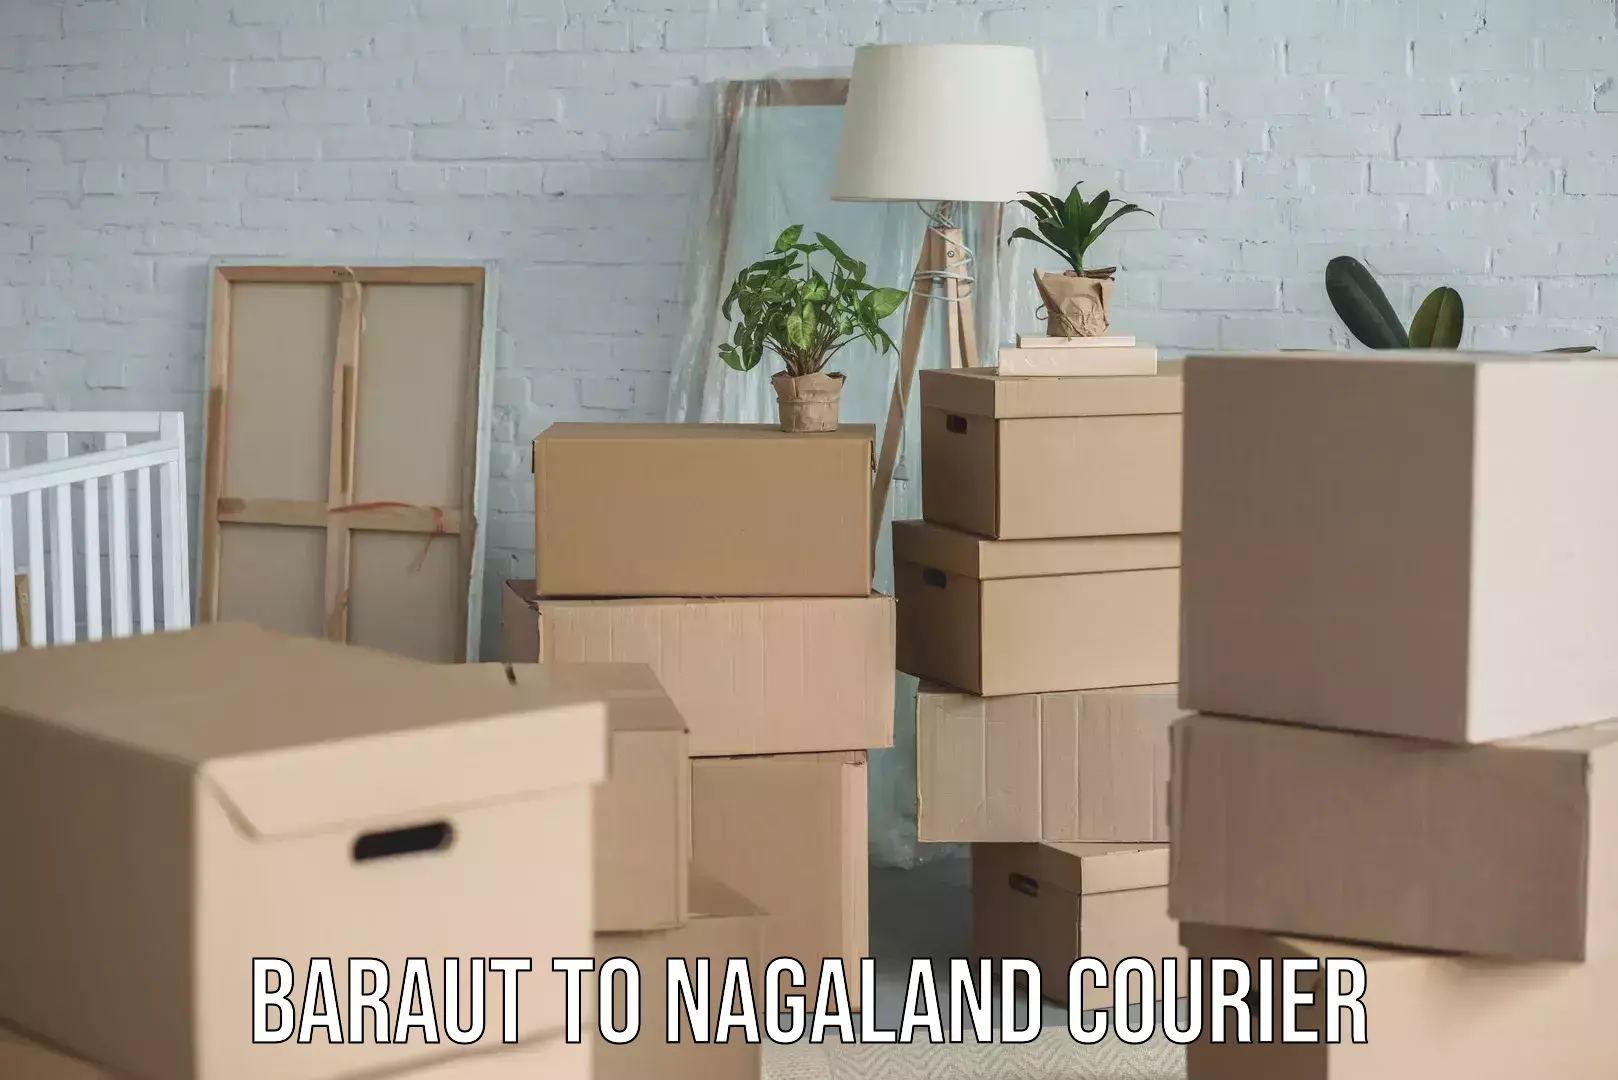 Full-service courier options Baraut to Nagaland